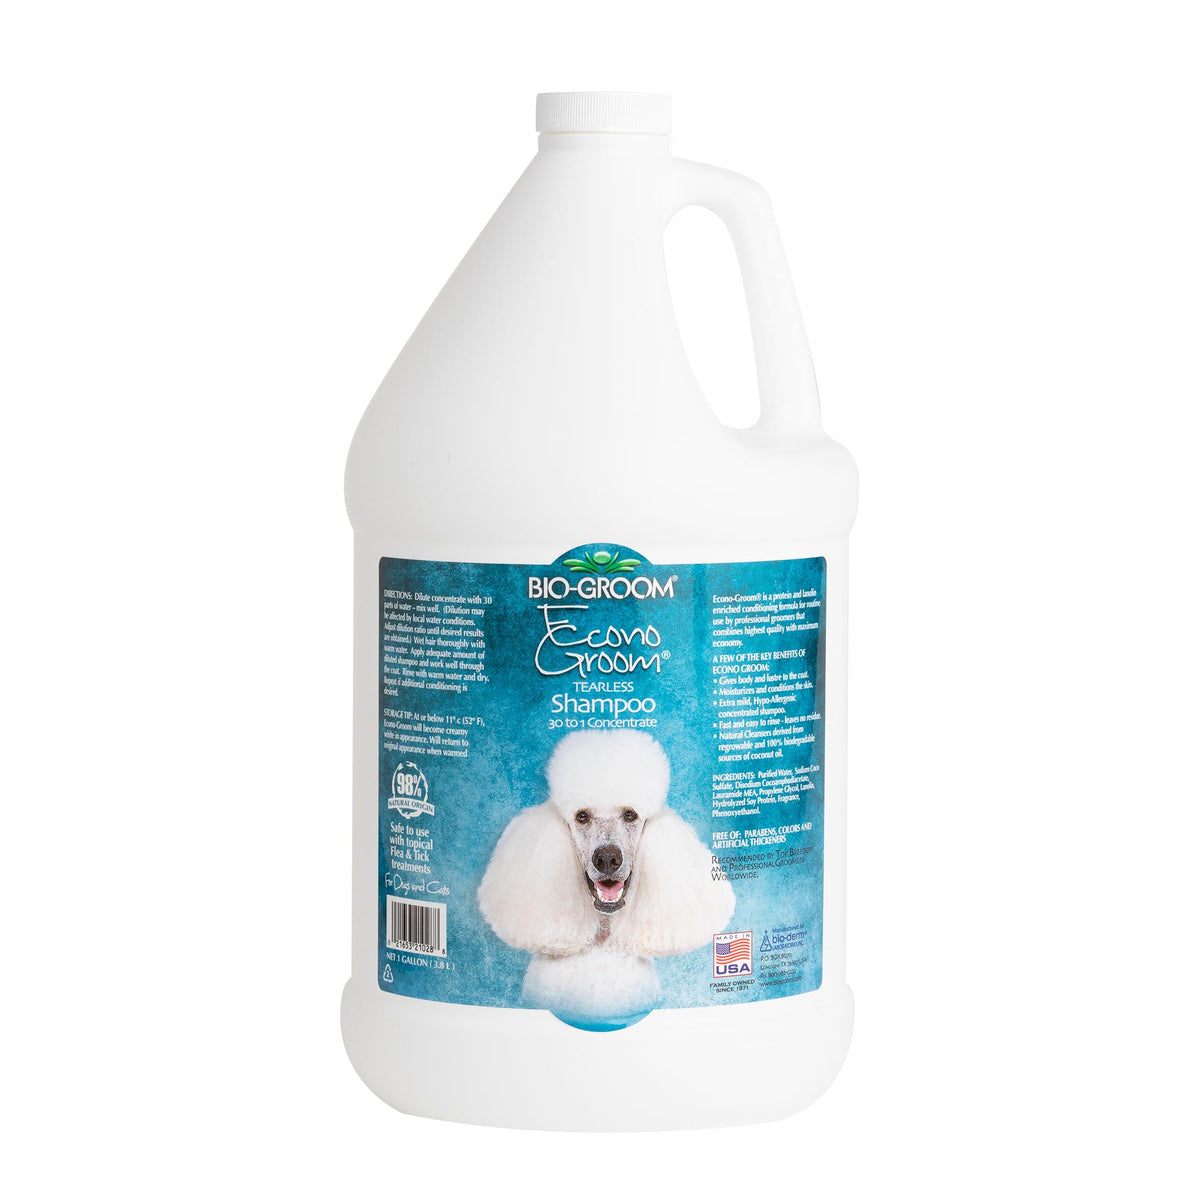 COWBOY MAGIC GREENSPOT REMOVER WATERLESS SHAMPOO - Danbury, CT - New  Milford, CT - Agriventures Agway Pickup & Delivery